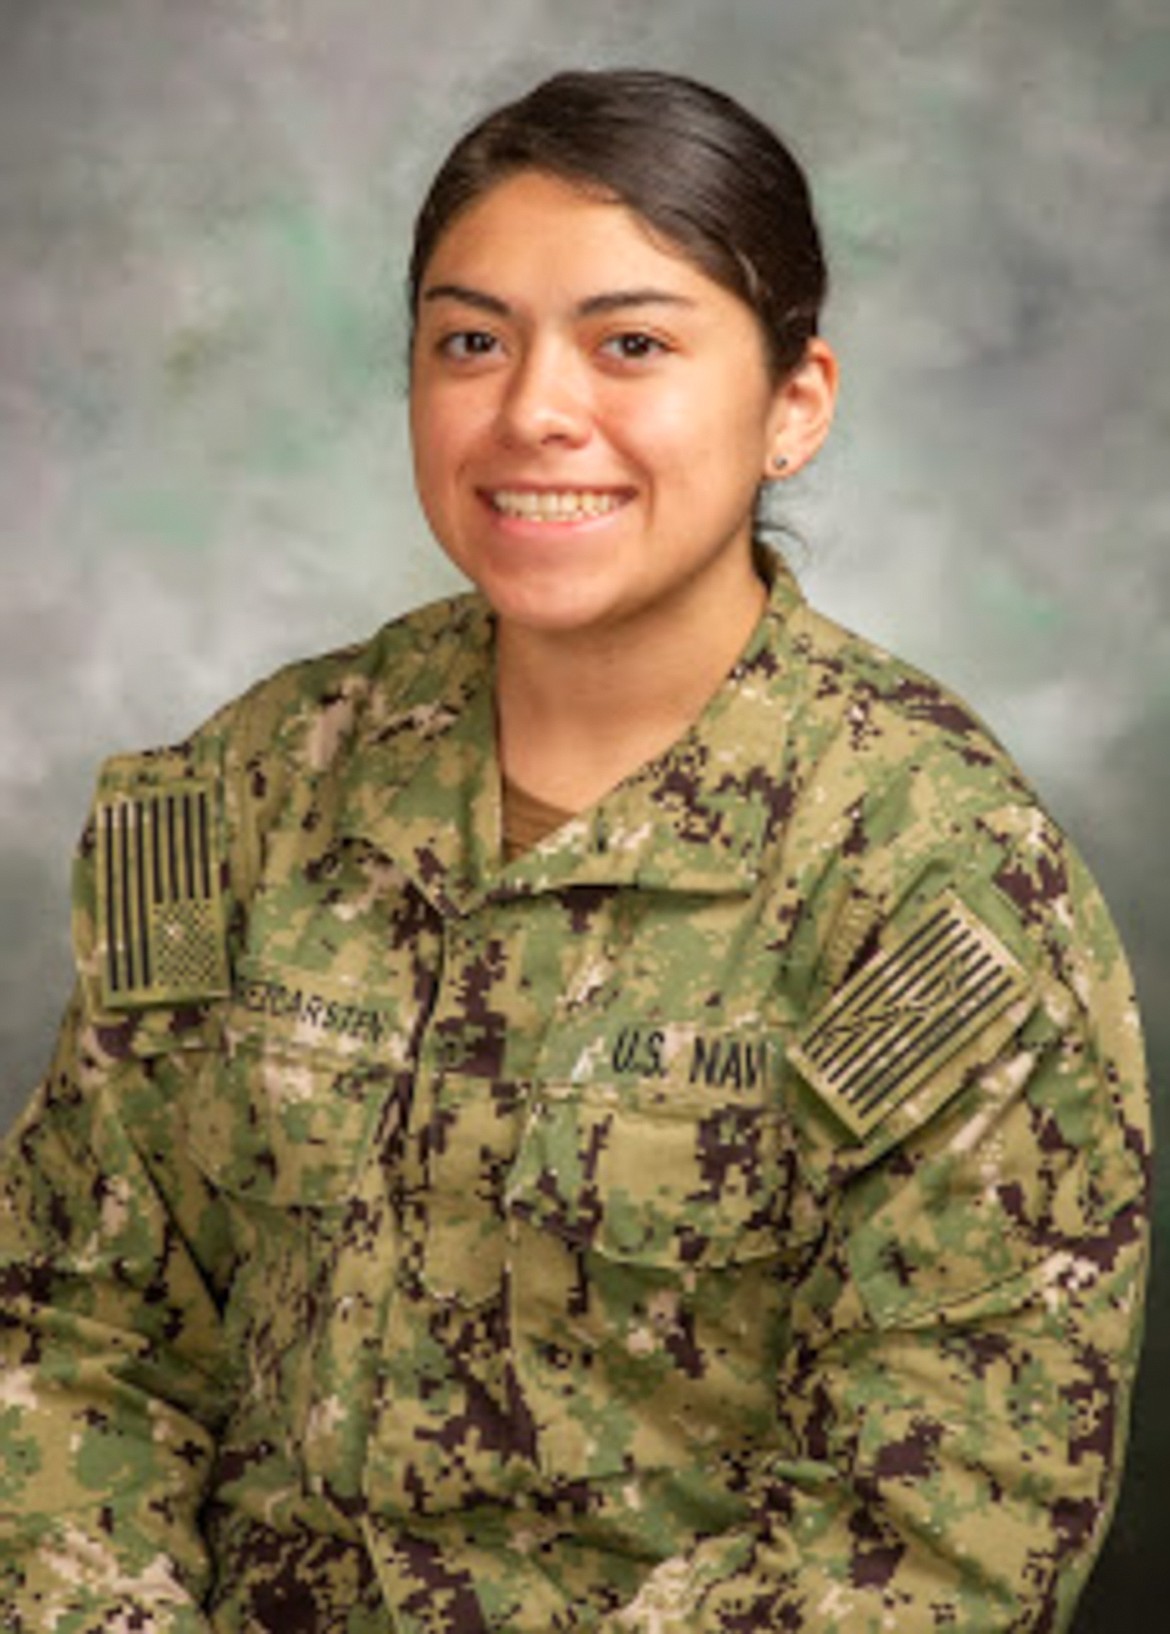 As a member of the U.S. Navy, Hospitalman Apprentice Julia Gutierrez-Carsten has worked on the front line of the fight against the coronavirus pandemic.